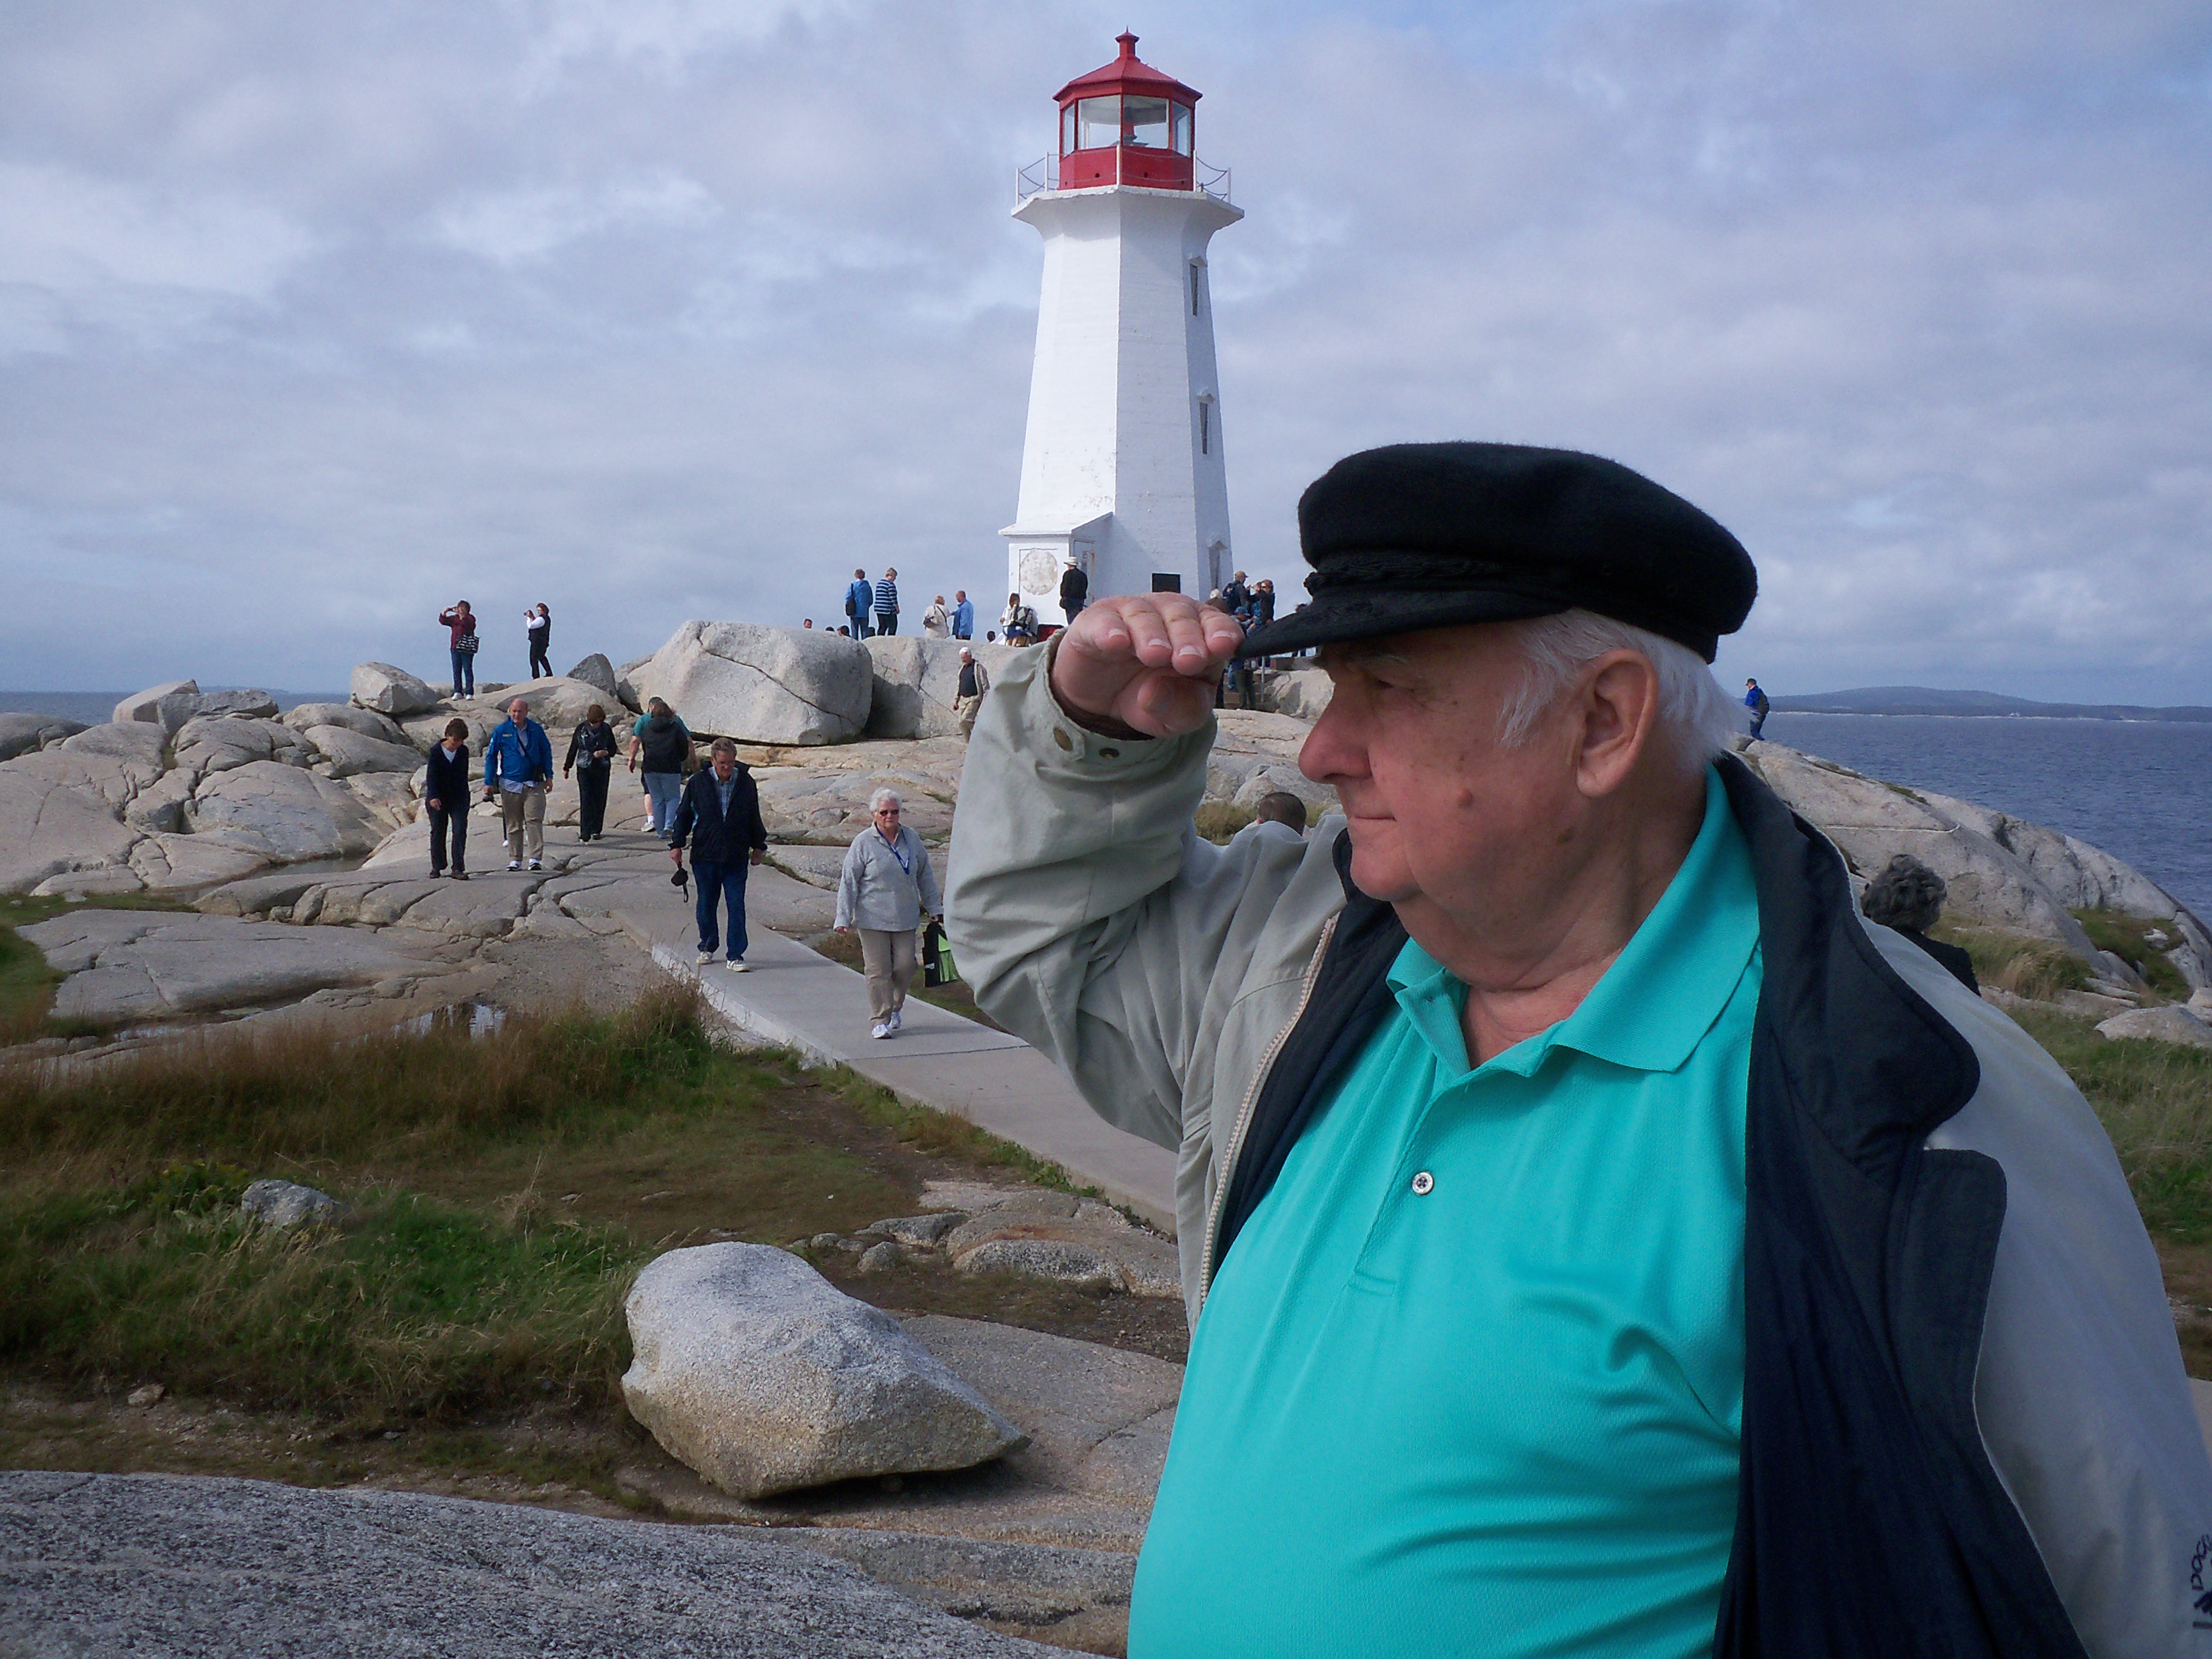 Dad lost at the lighthouse